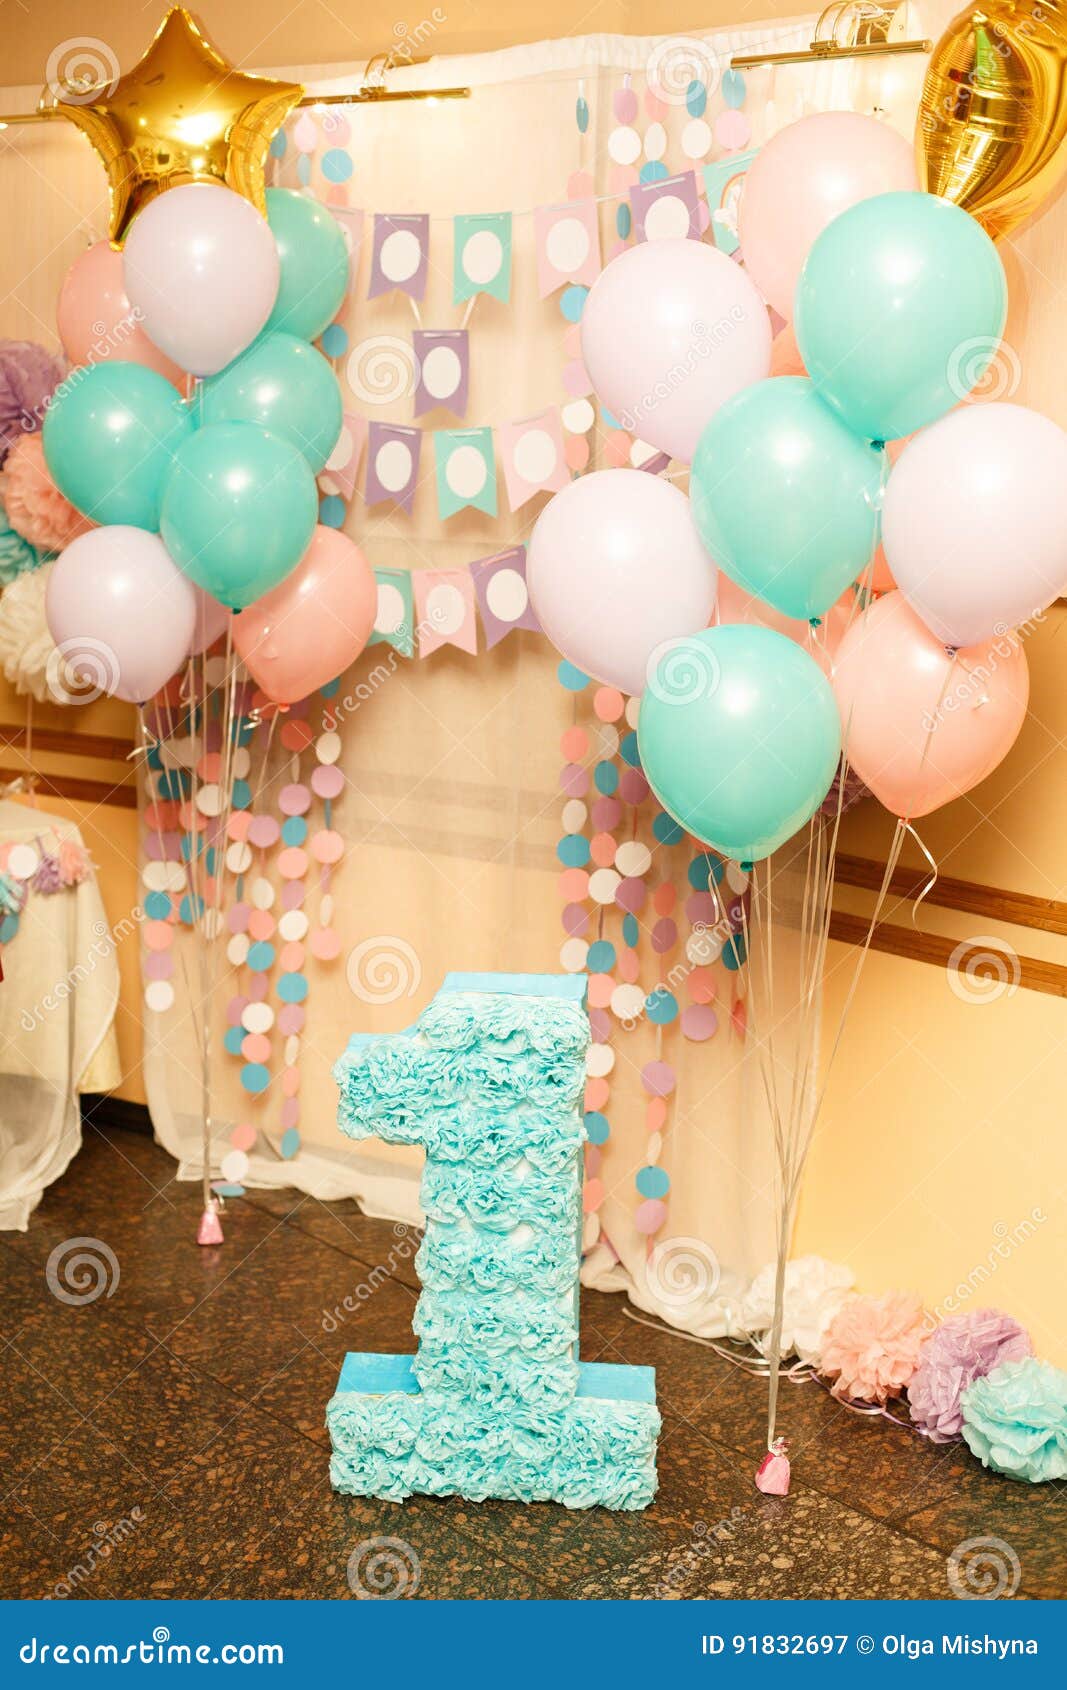  Birthday  Party  For Child One  Years  Old  Stock Image Image 